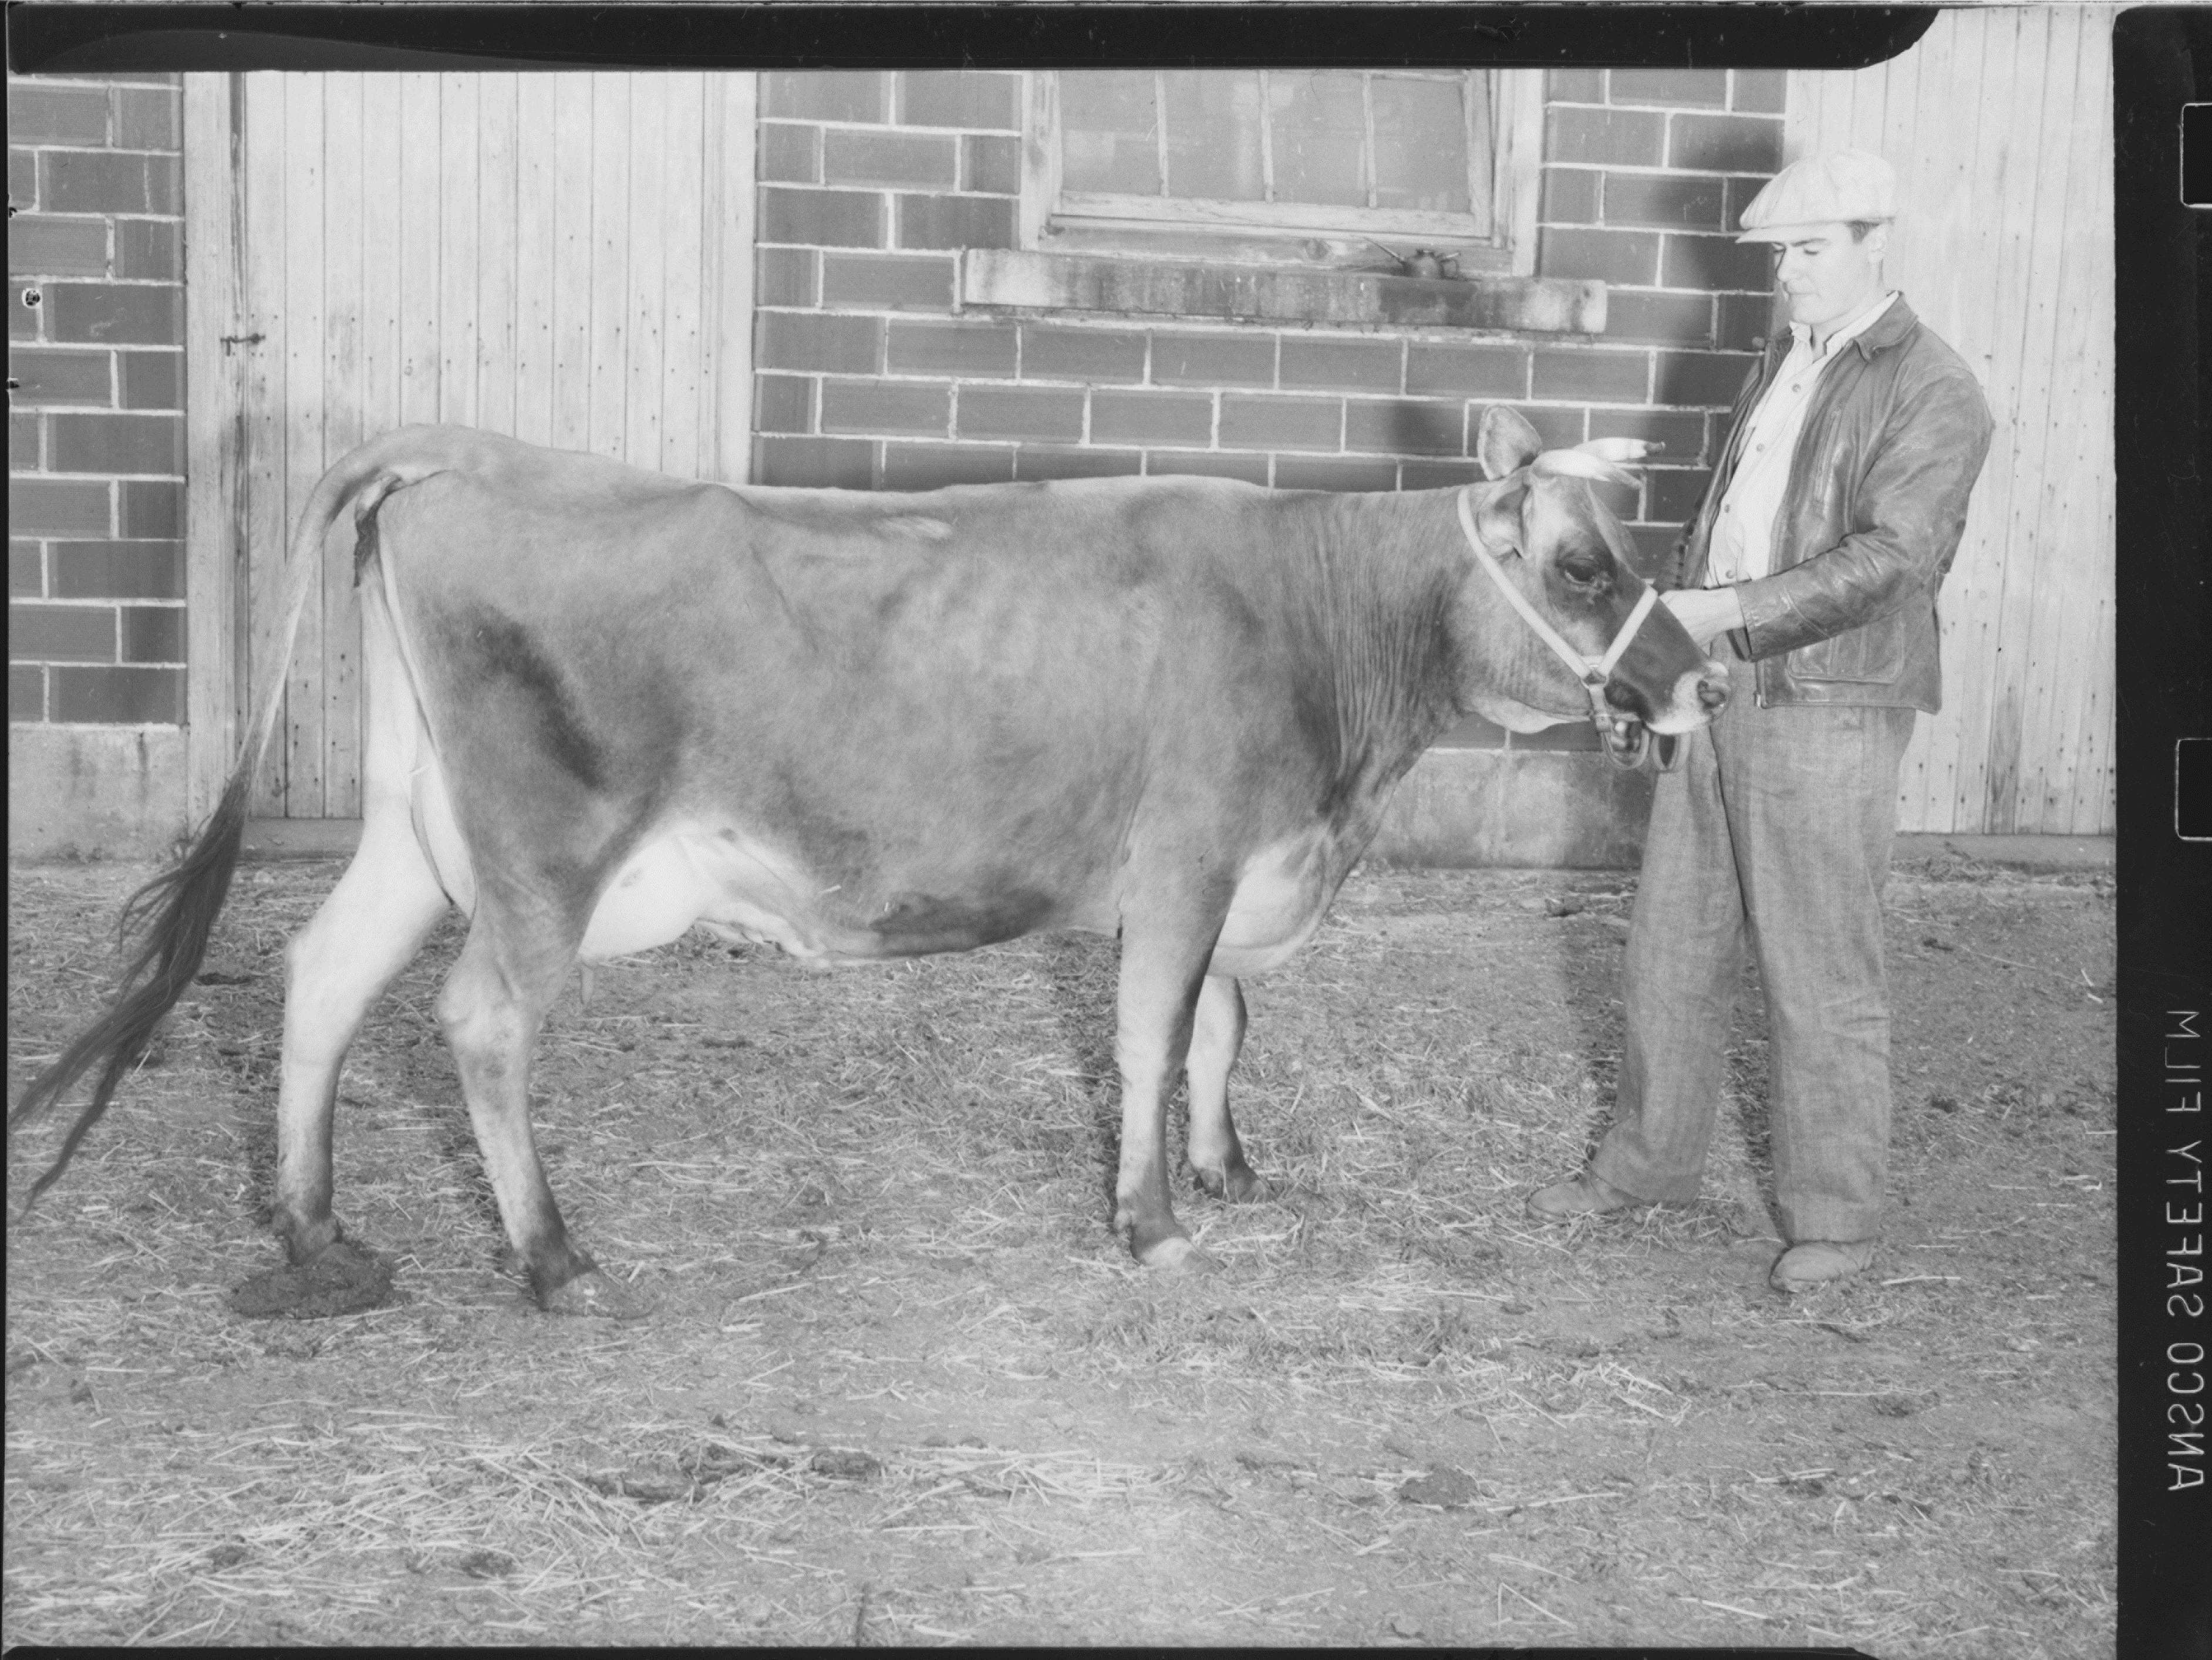 Cow at the House of Refuge - 1940s